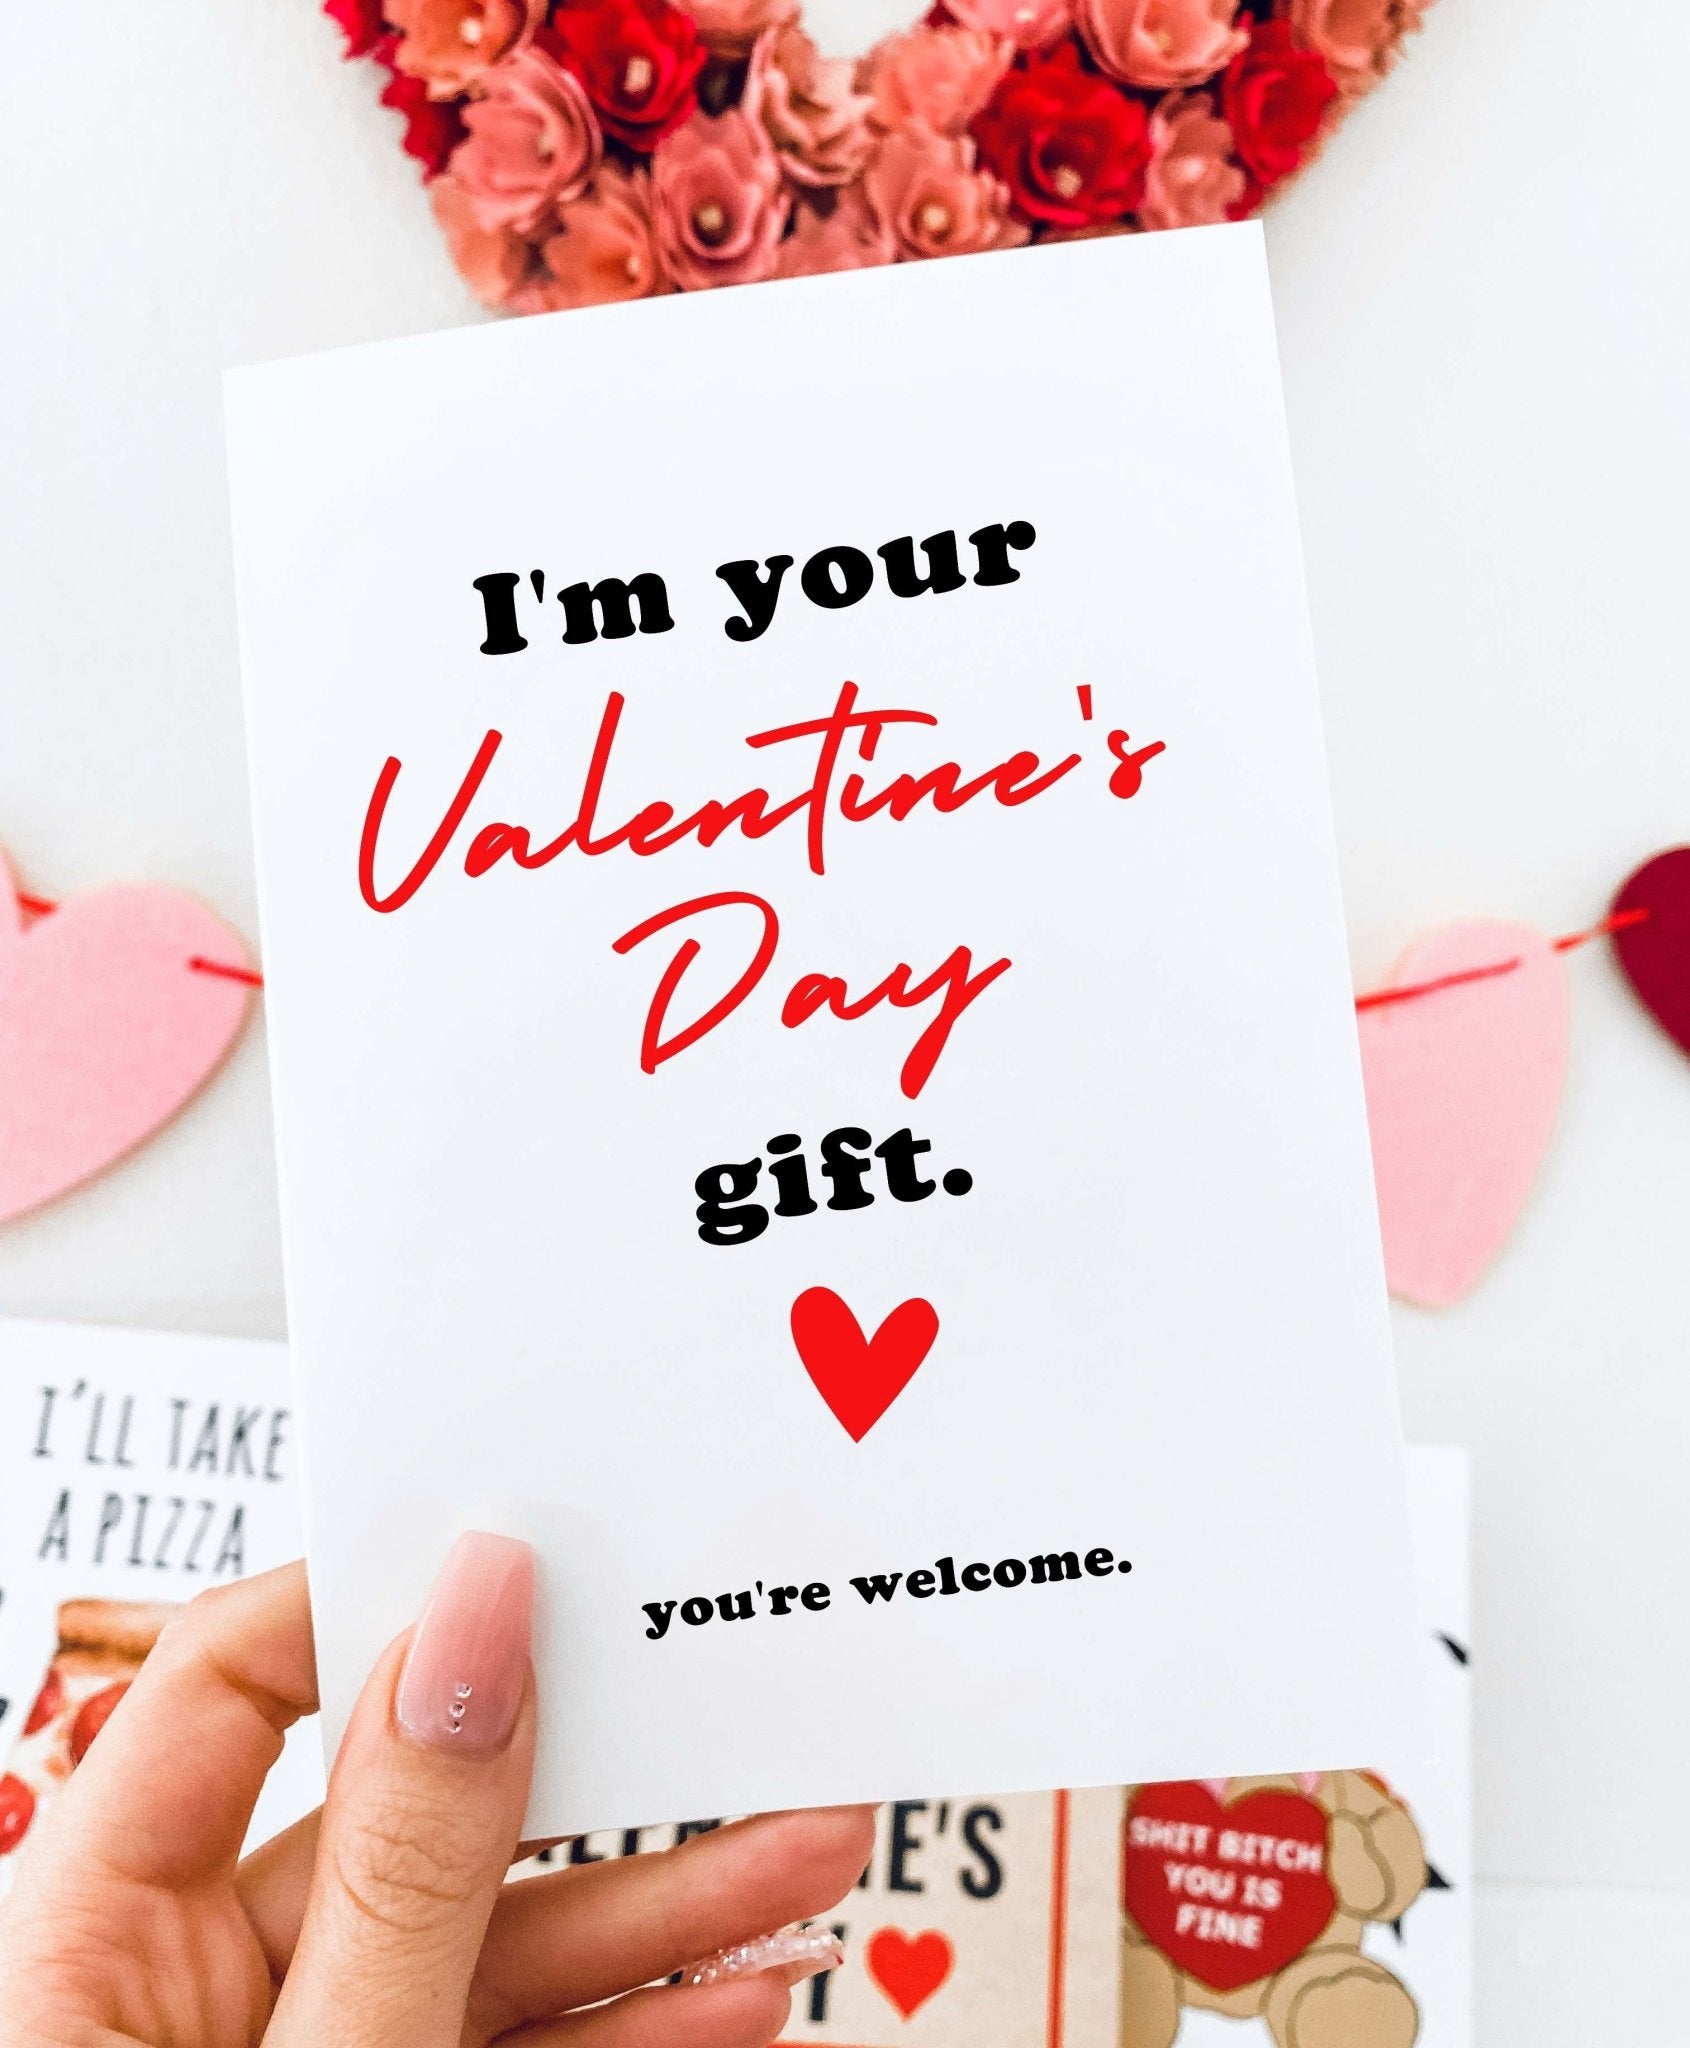 I'm Your Valentine's Day Gift You're Welcome Greeting Card - UntamedEgo LLC.